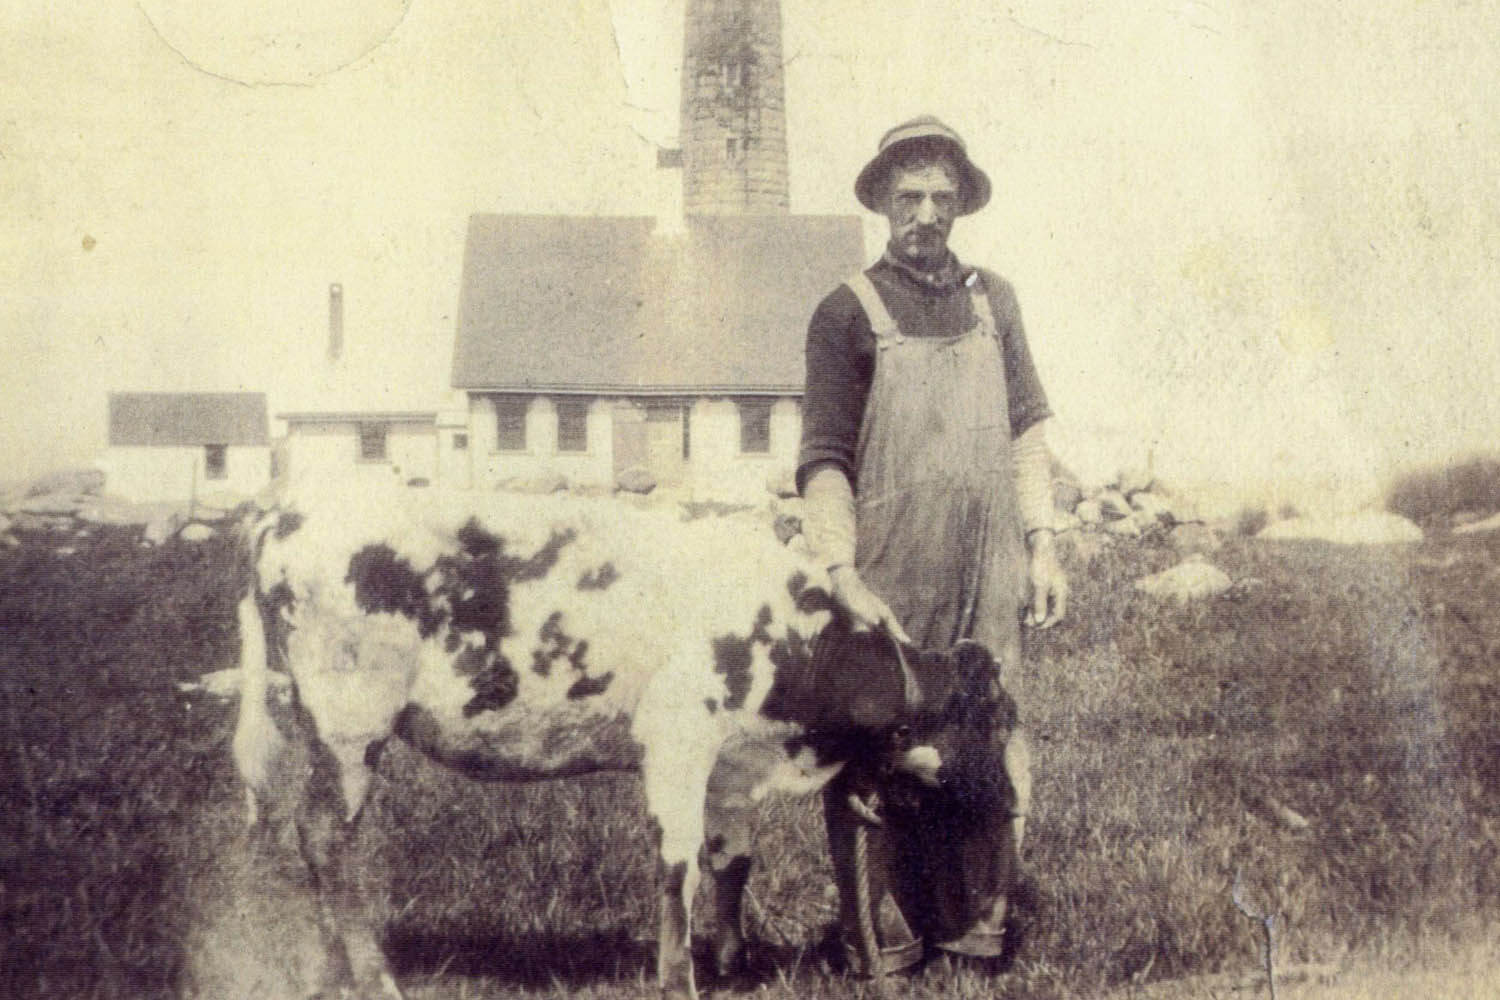 Keeper William Daggett (1870-1945) tending his cow near the North tower c.1918.